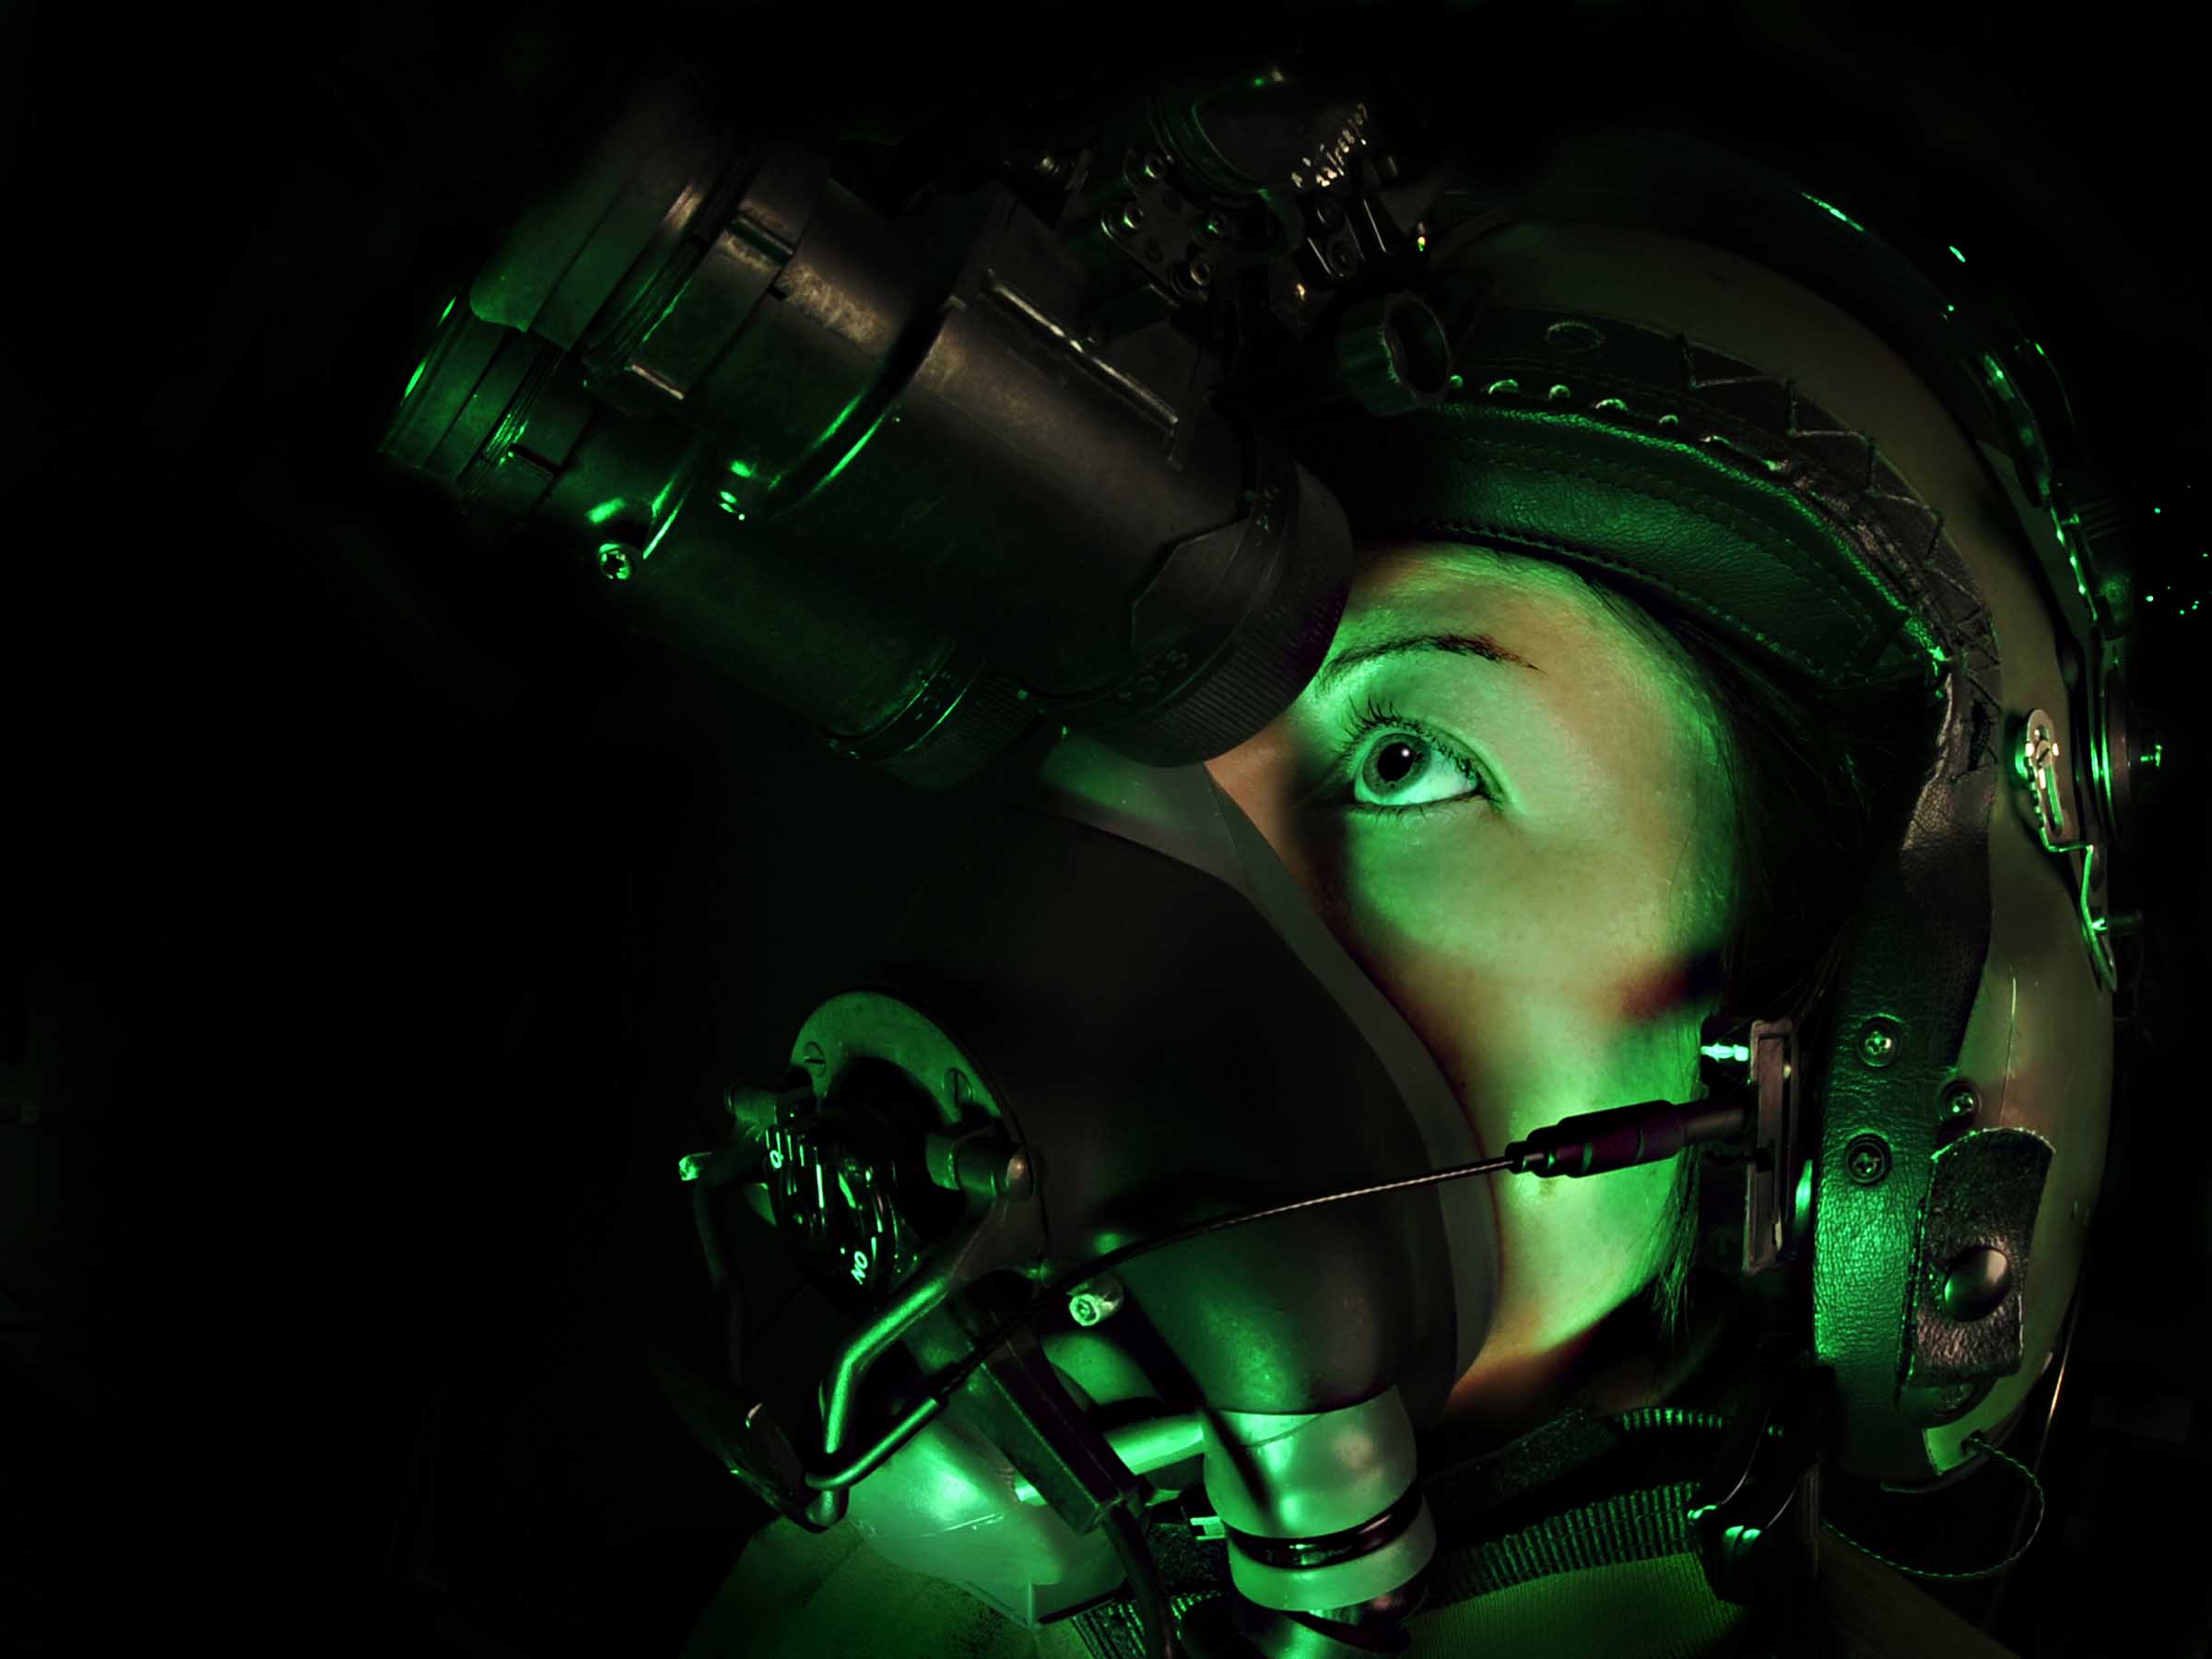 Image shows aviator wearing specialist helmet with binocular and light attachment.